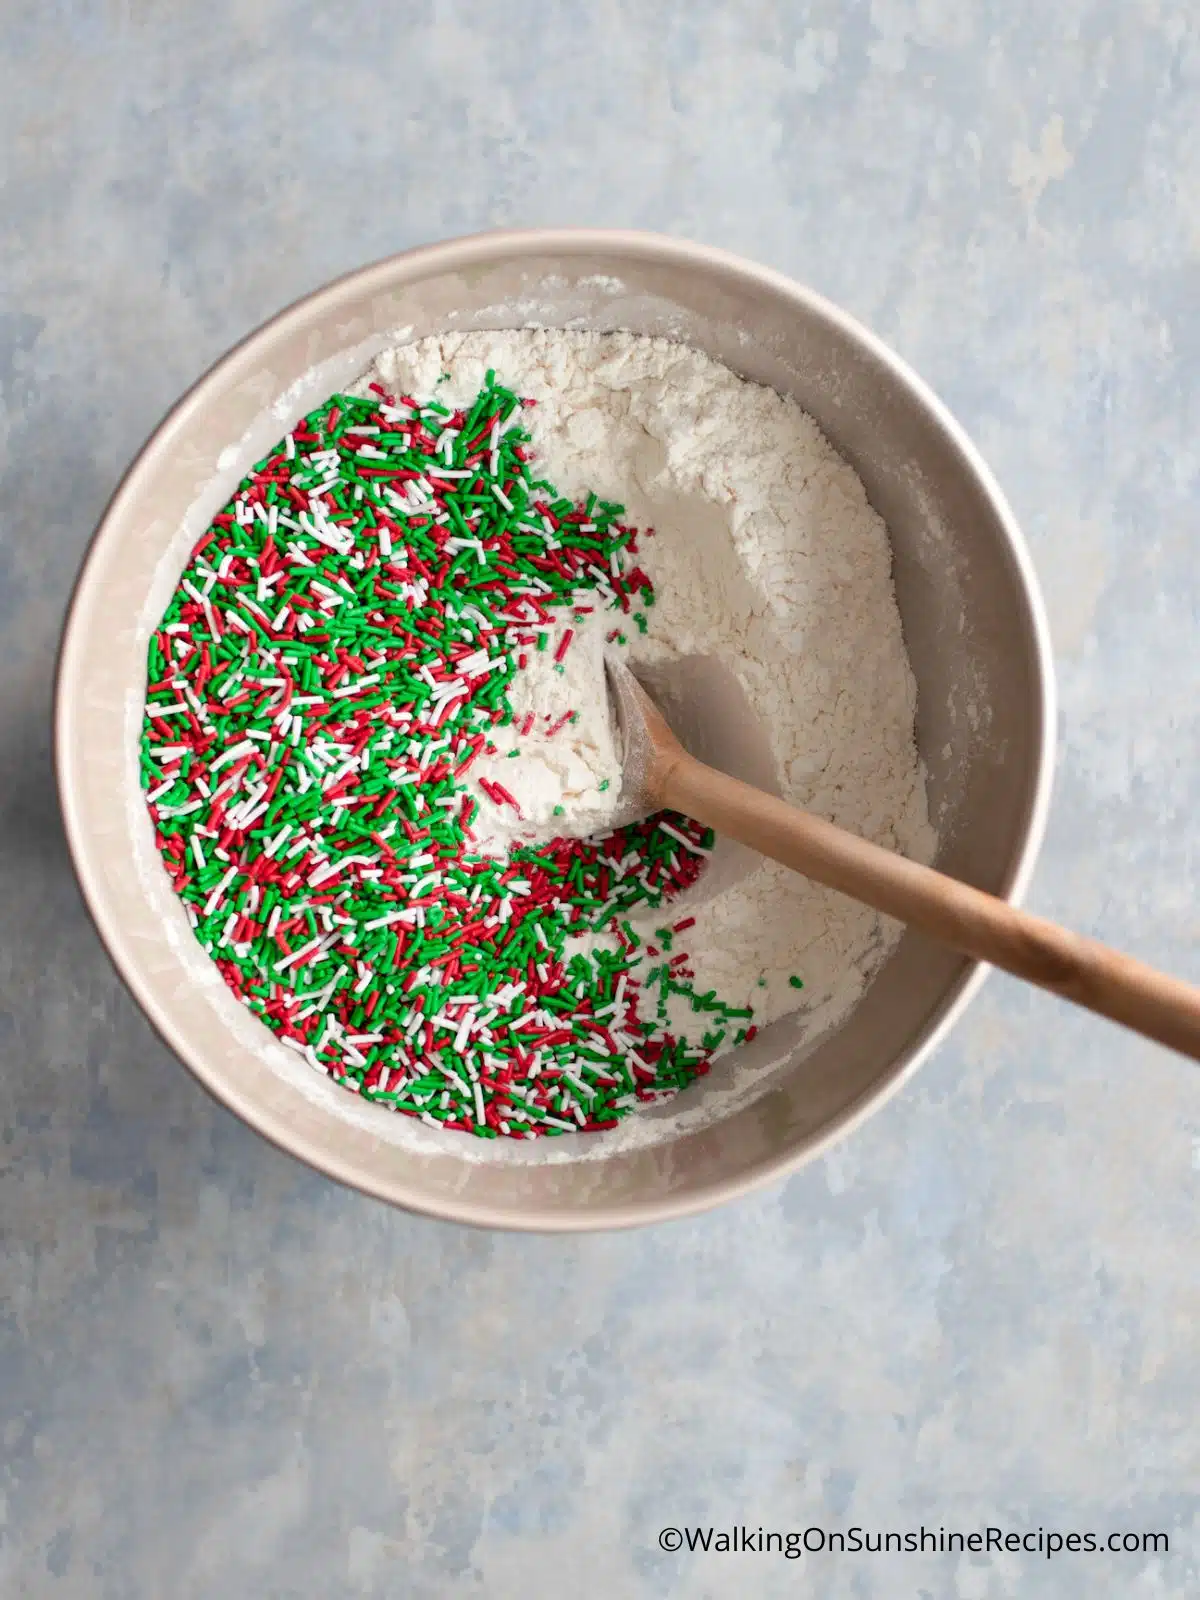 combine flour with sprinkles.